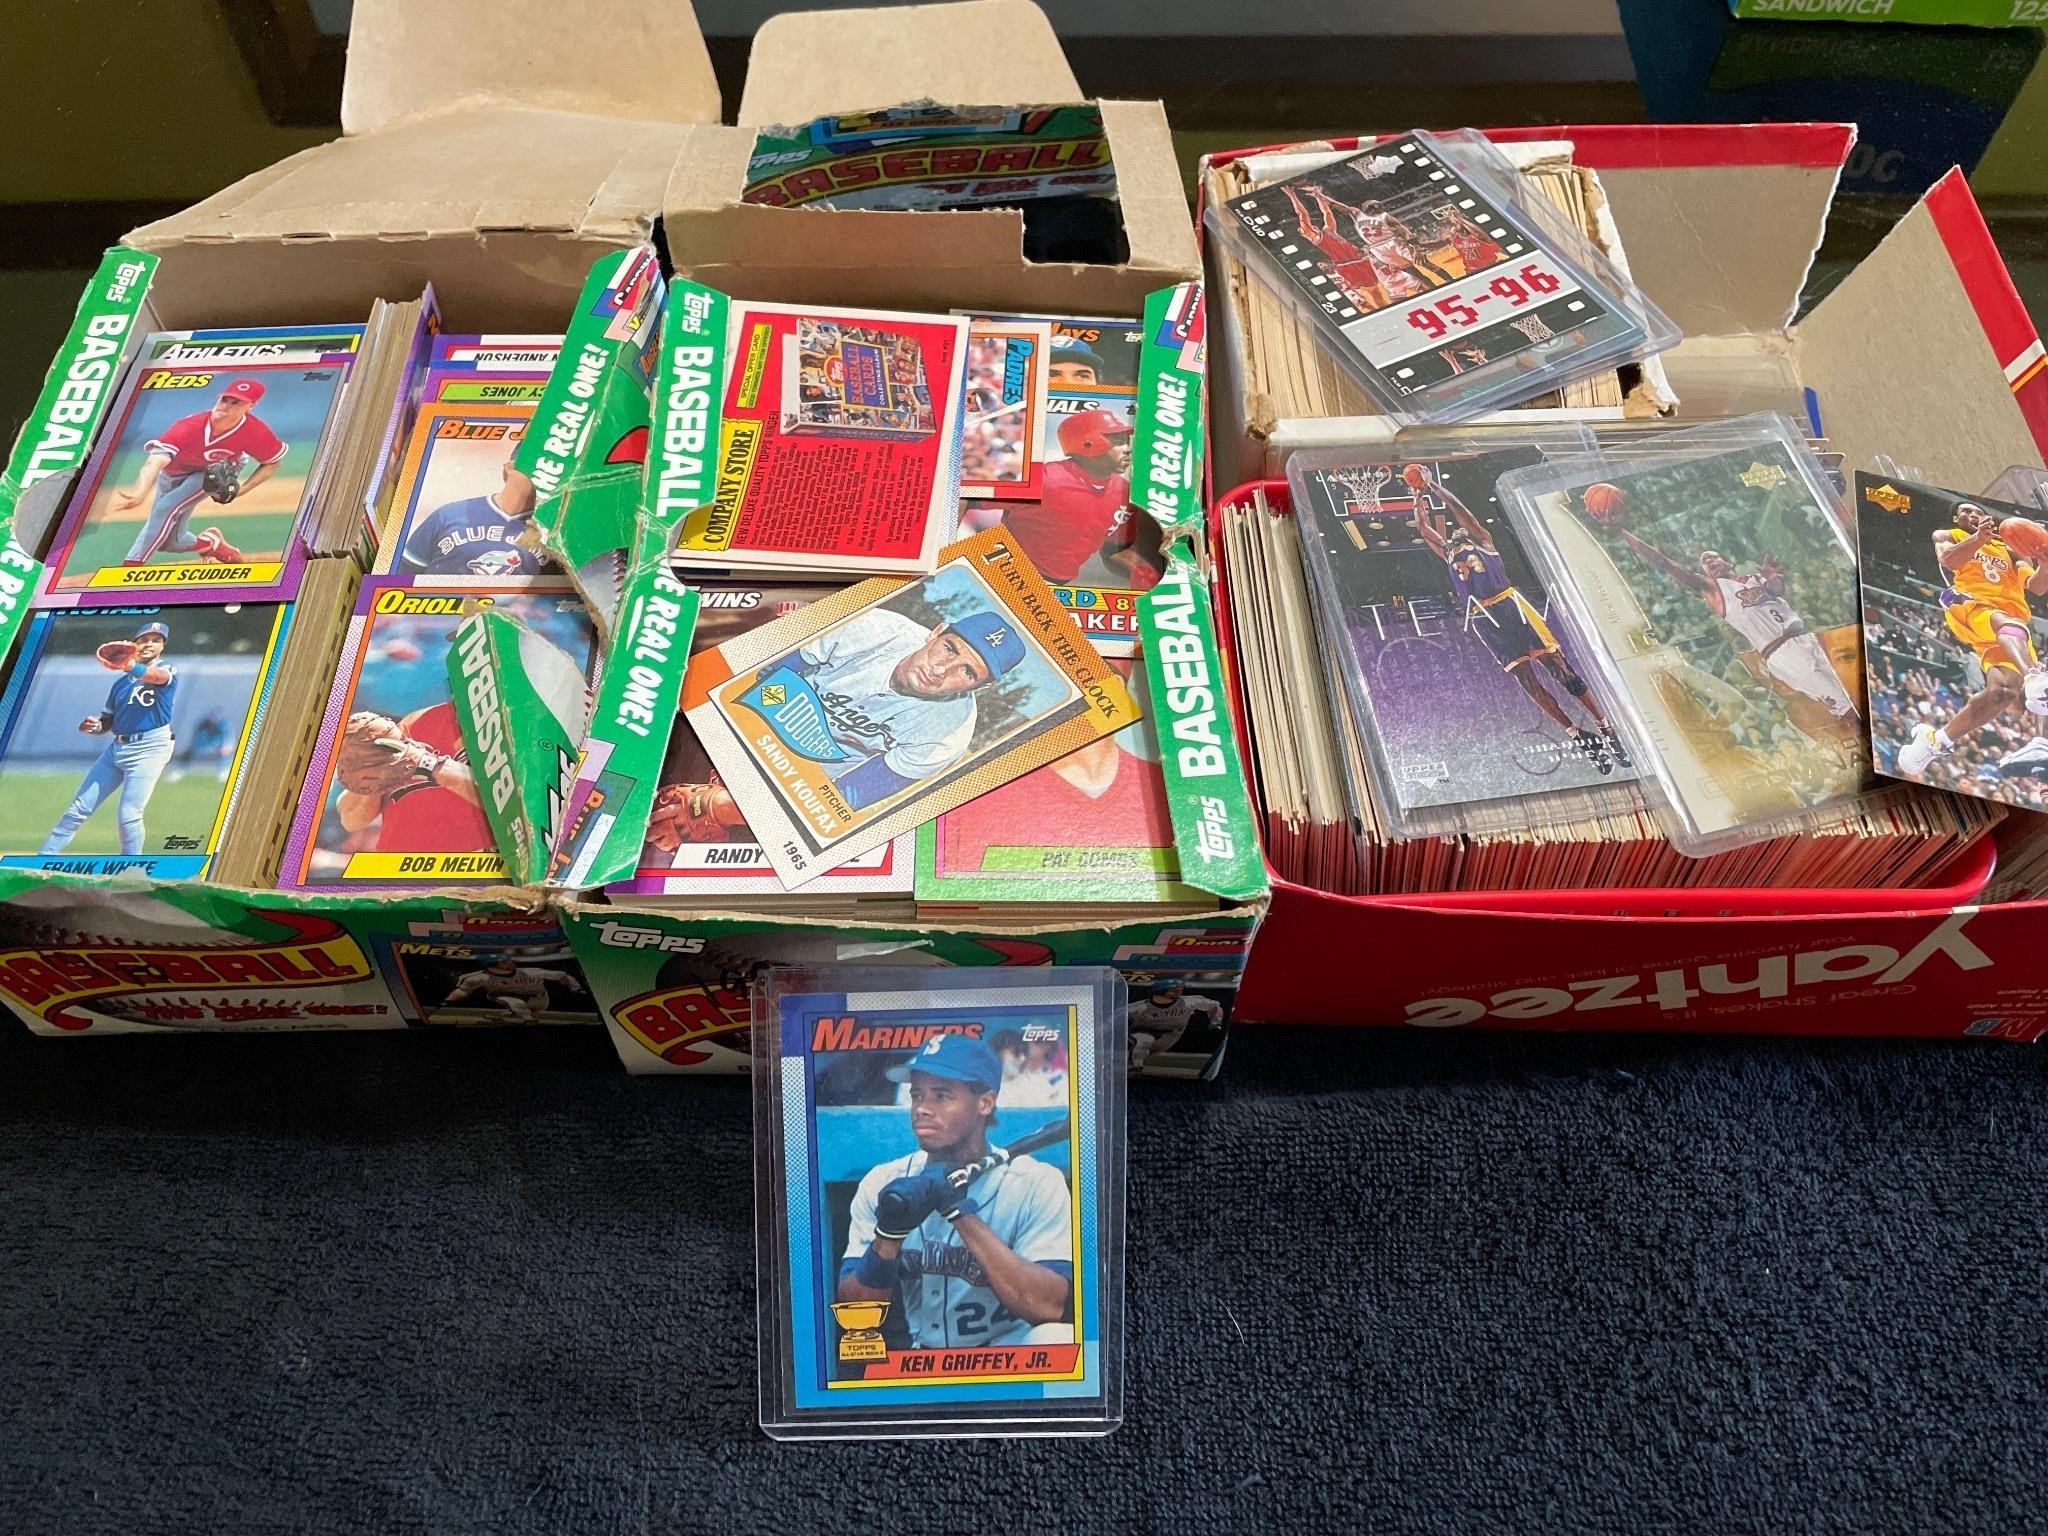 Ken Griffey Jr. rookie and assorted